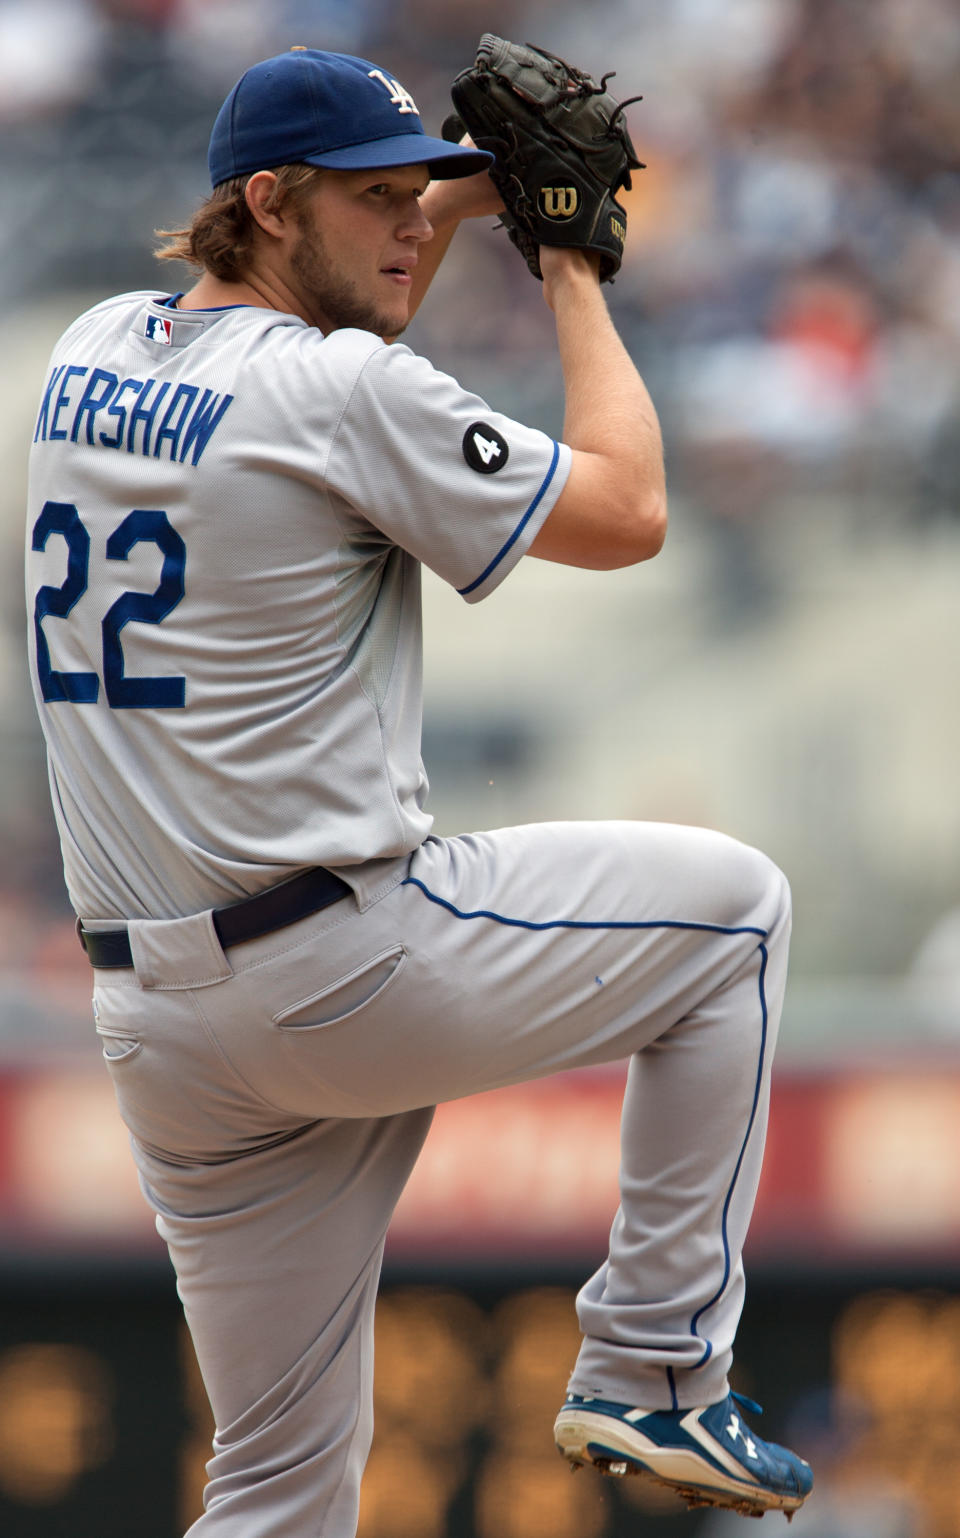 SAN DIEGO, CA - SEPTEMBER 25: Starting pitcher Clayton Kershaw #22 of the Los Angeles Dodgers throws the ball during the 1st inning of the game against the San Diego Padres at Petco Park on September 25, 2011 in San Diego, California. (Photo by Kent C. Horner/Getty Images)